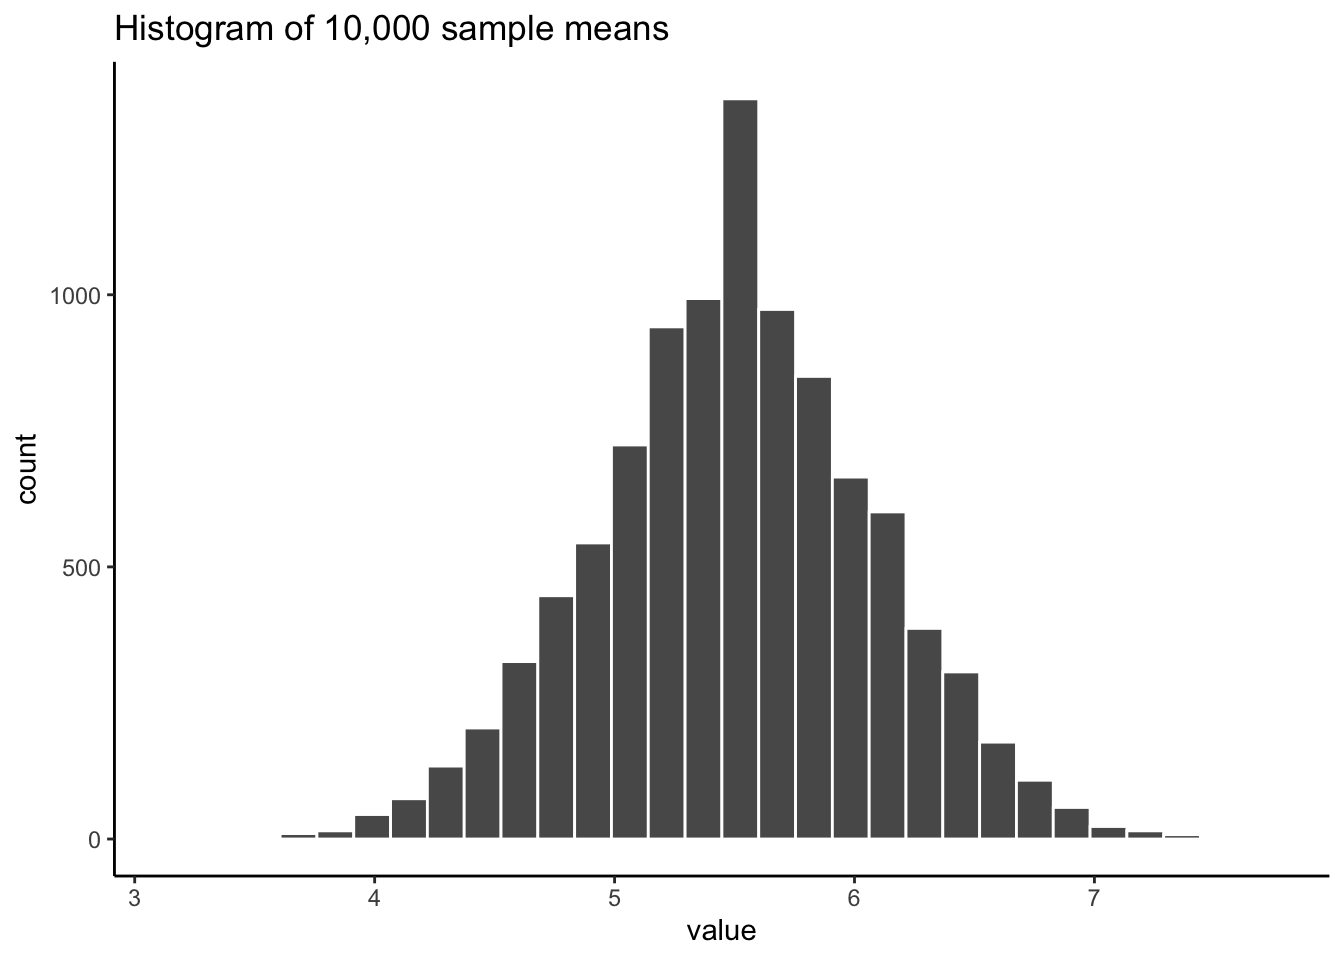 A histogram showing the sample means for 10,000 samples, each size 20, from the uniform distribution of numbers from 1 to 10. The expected mean is 5.5, and the histogram is centered on 5.5. The mean of each sample is not always 5.5 because of sampling error or chance